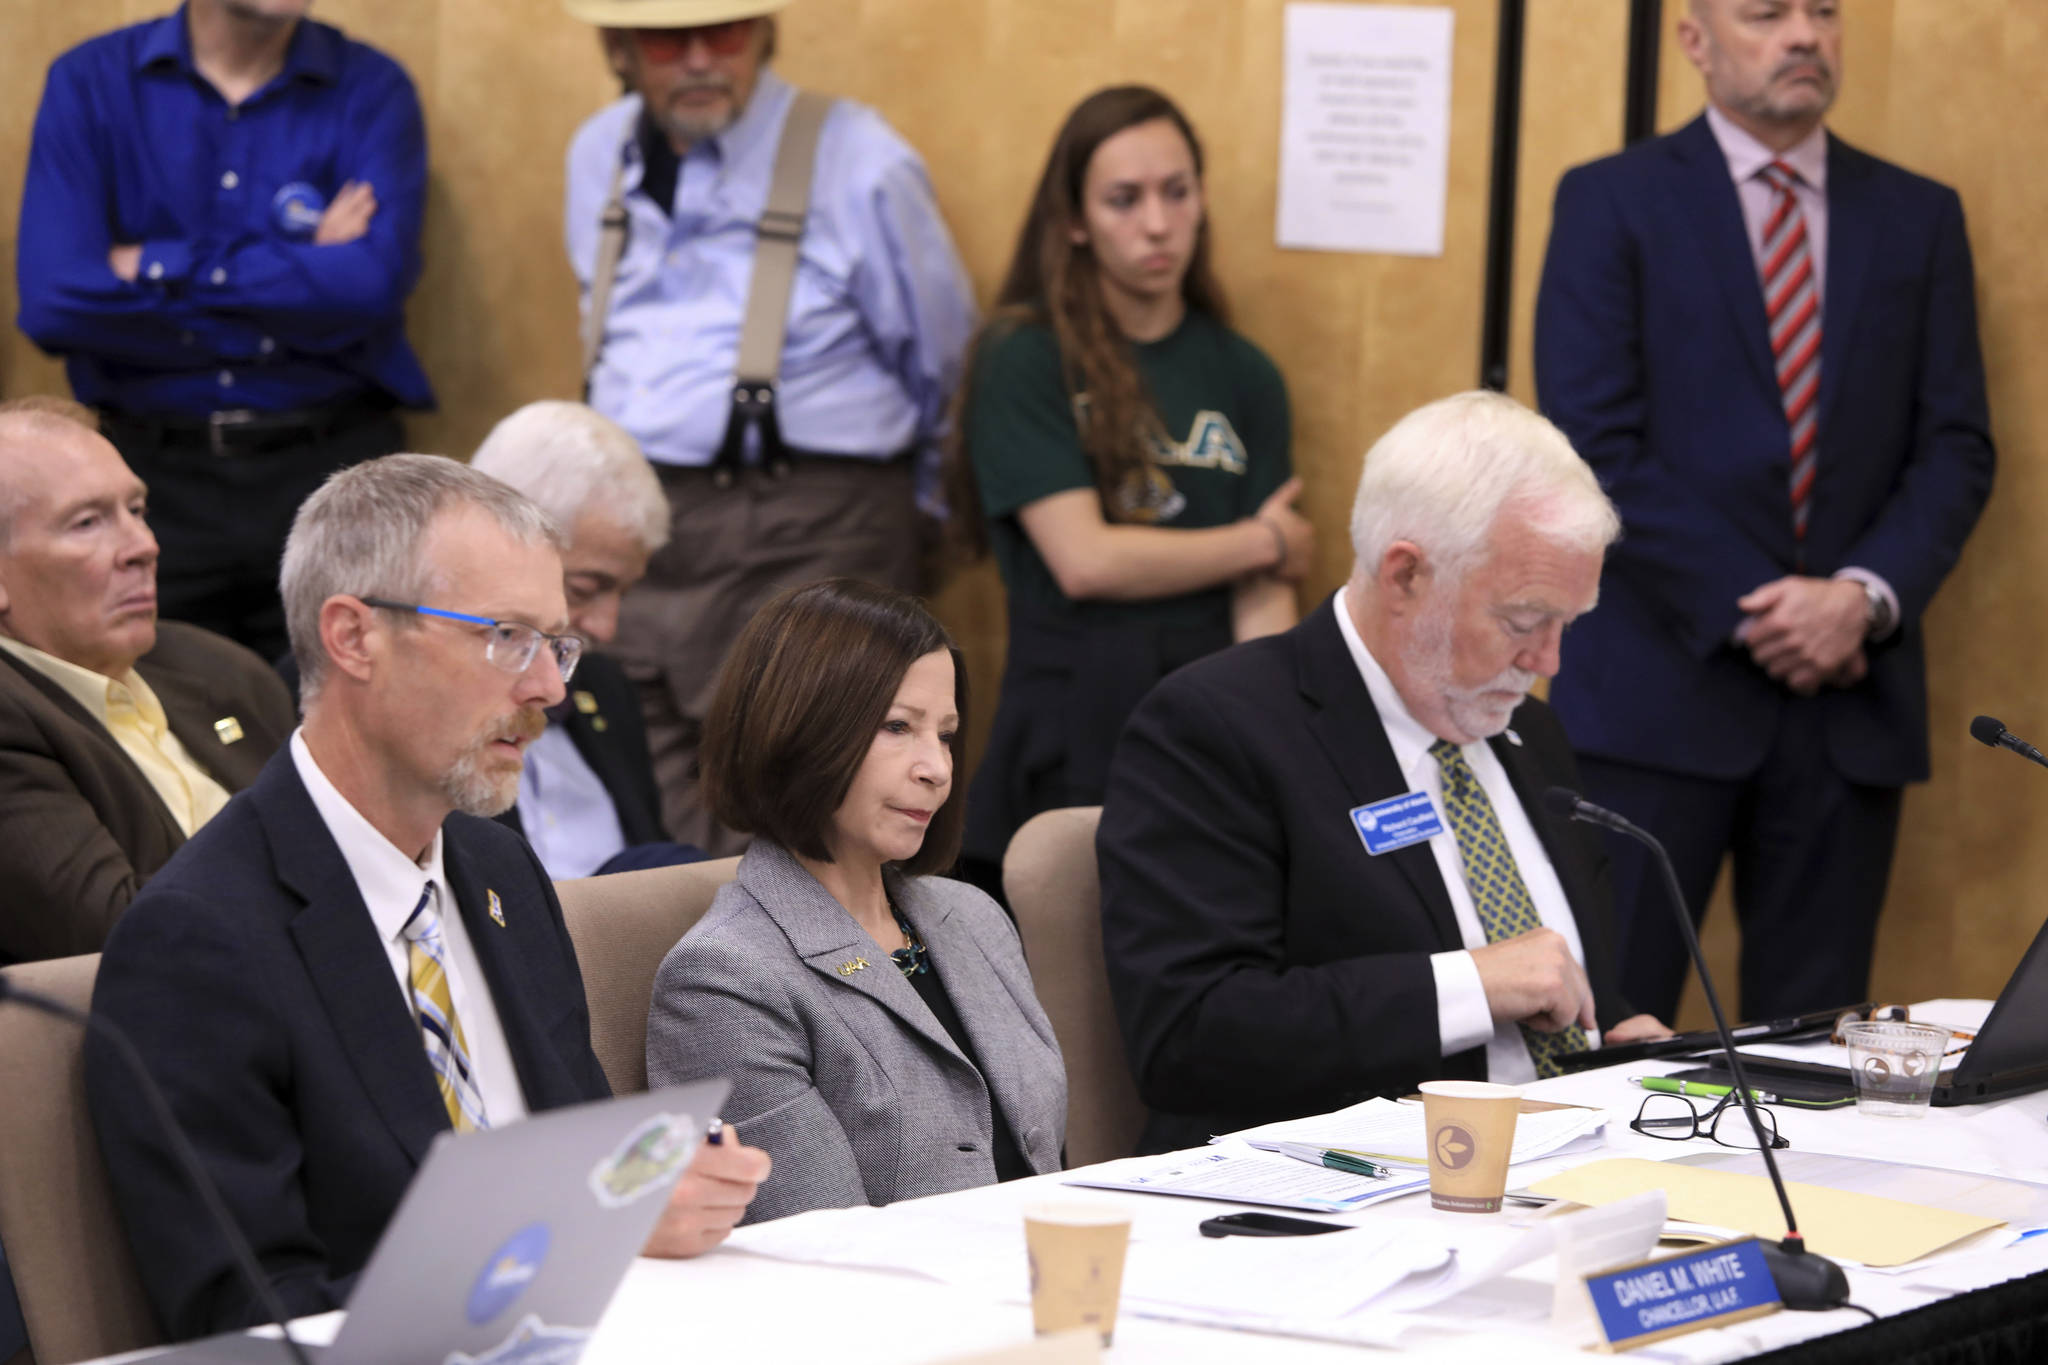 From left, University of Alaska Fairbanks Chancellor Daniel White, UA Anchorage Chancellor Cathy Sandeen and then-UA Southeast Chancellor Rick Caulfield speak at a UA Board of Regents meeting in Anchorage on July 30, 2019. Sandeen, the chancellor of the University of Alaska Anchorage has announced her intention to take a new position as the president of a California university, Thursday, Oct. 29, 2020.(AP Photo / Dan Joling)